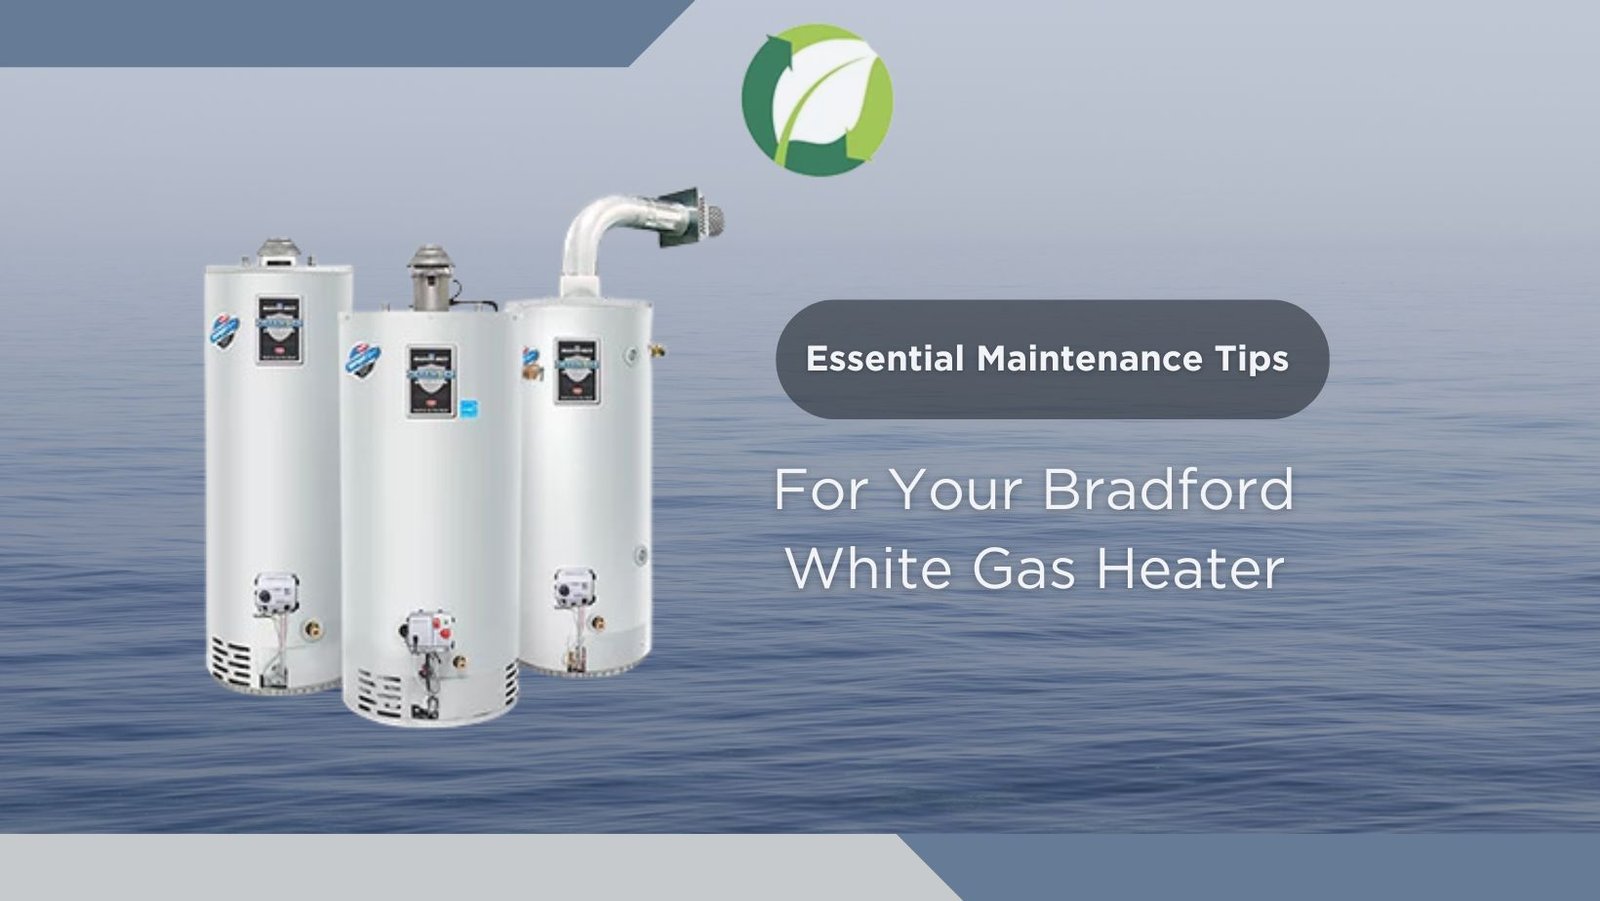 What Maintenance Does Your Bradford White Gas Heater Need?